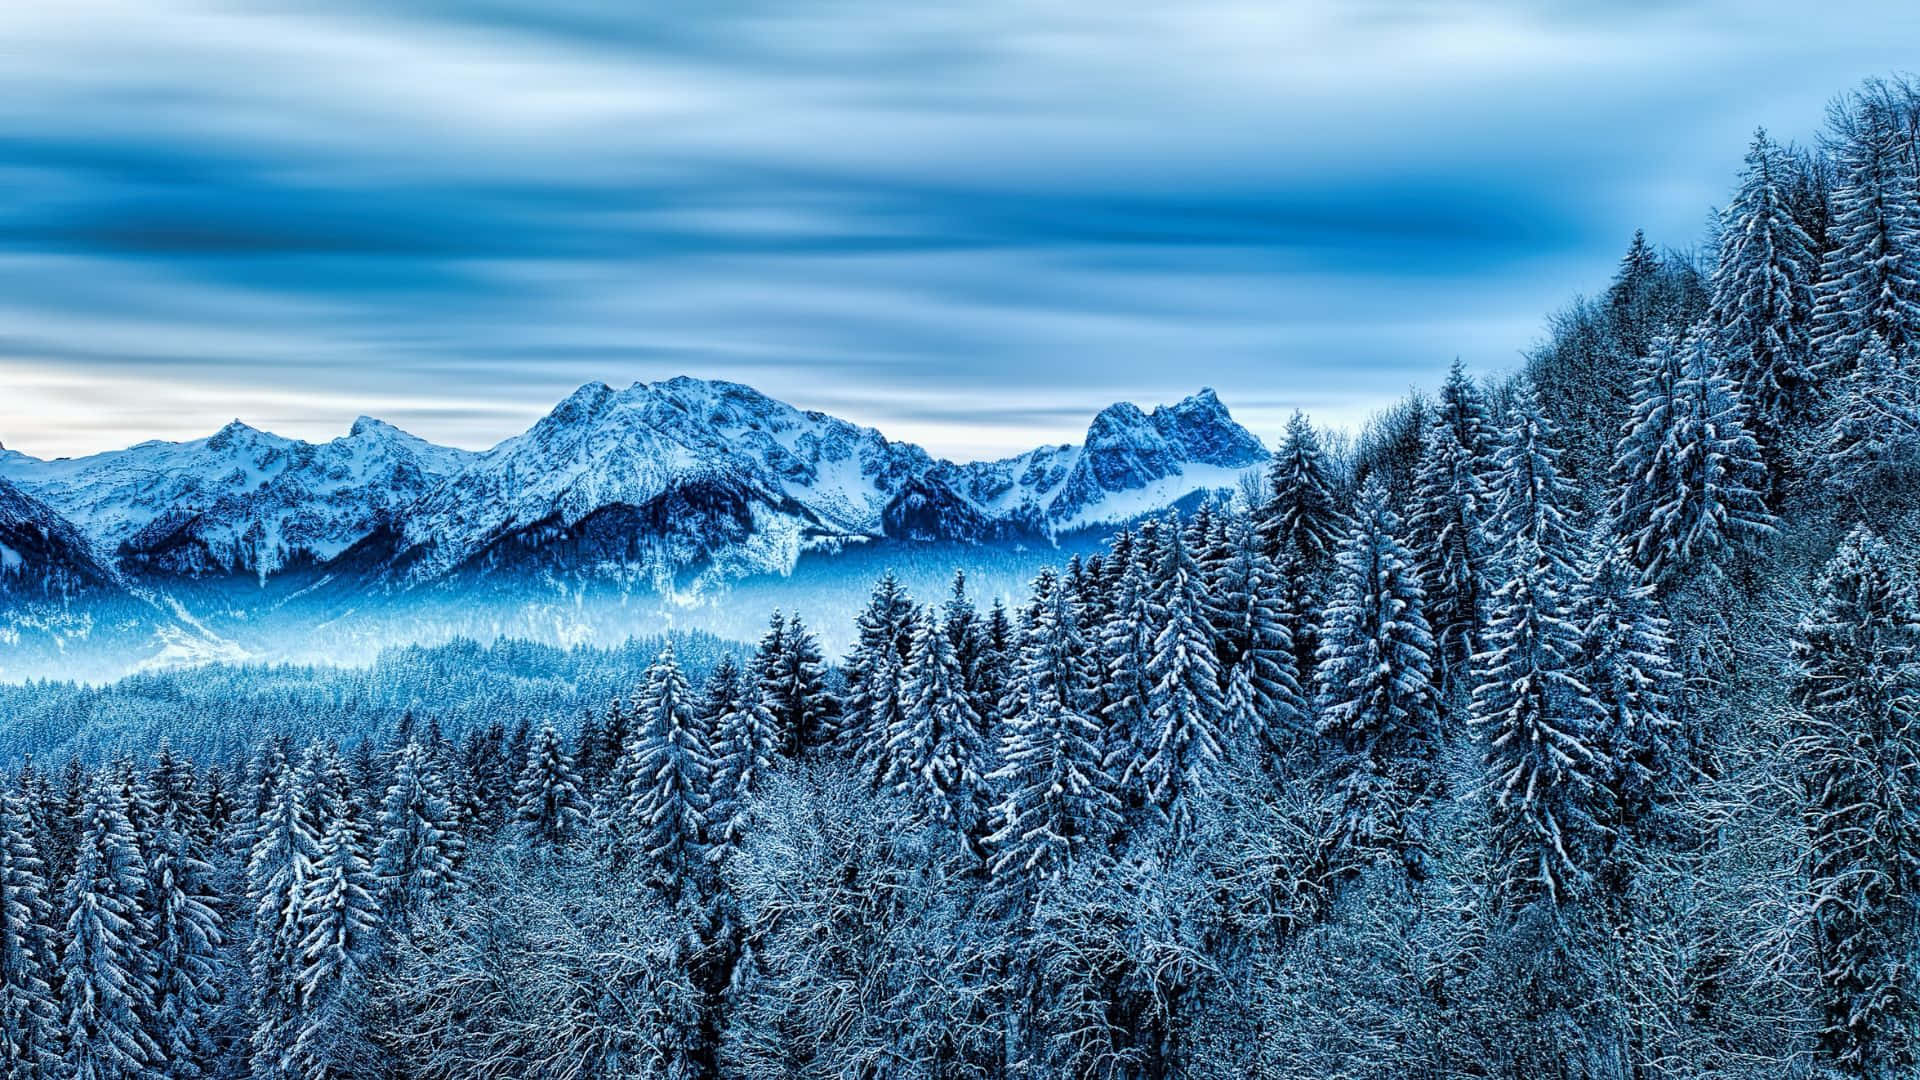 Witness the beauty of the winter forest" Wallpaper